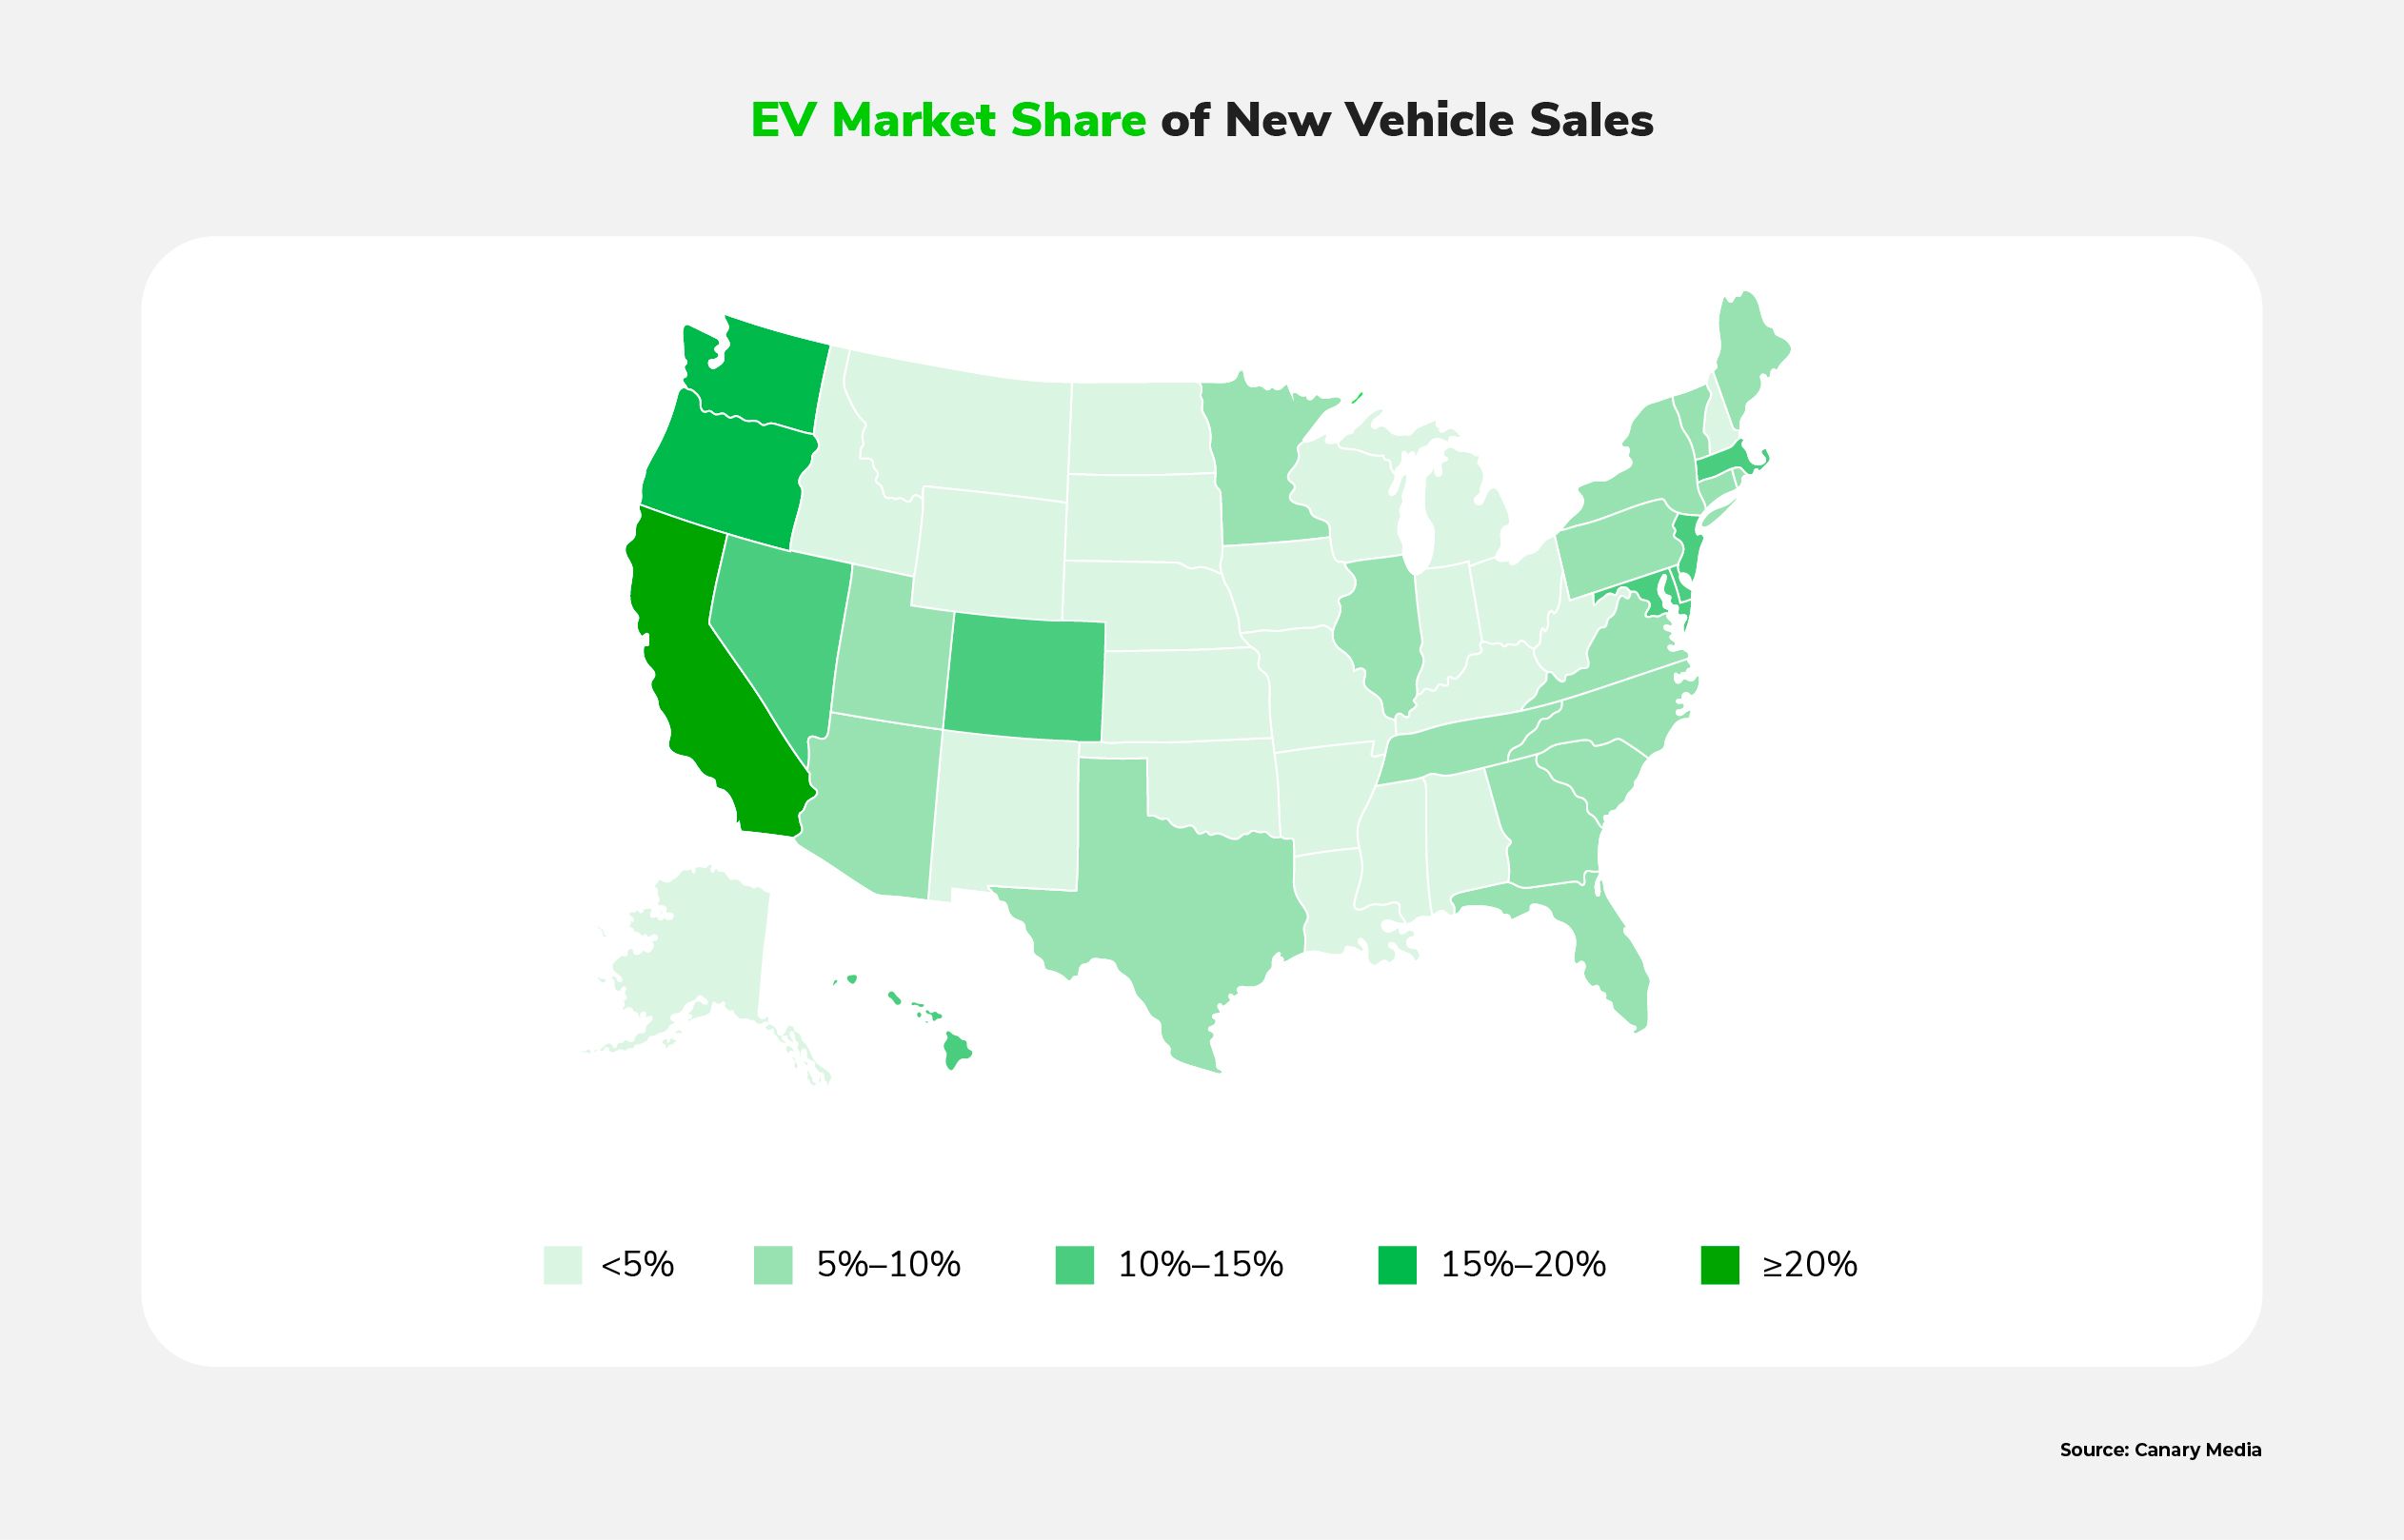 A map of the USA, showing each state's EV adoption rate